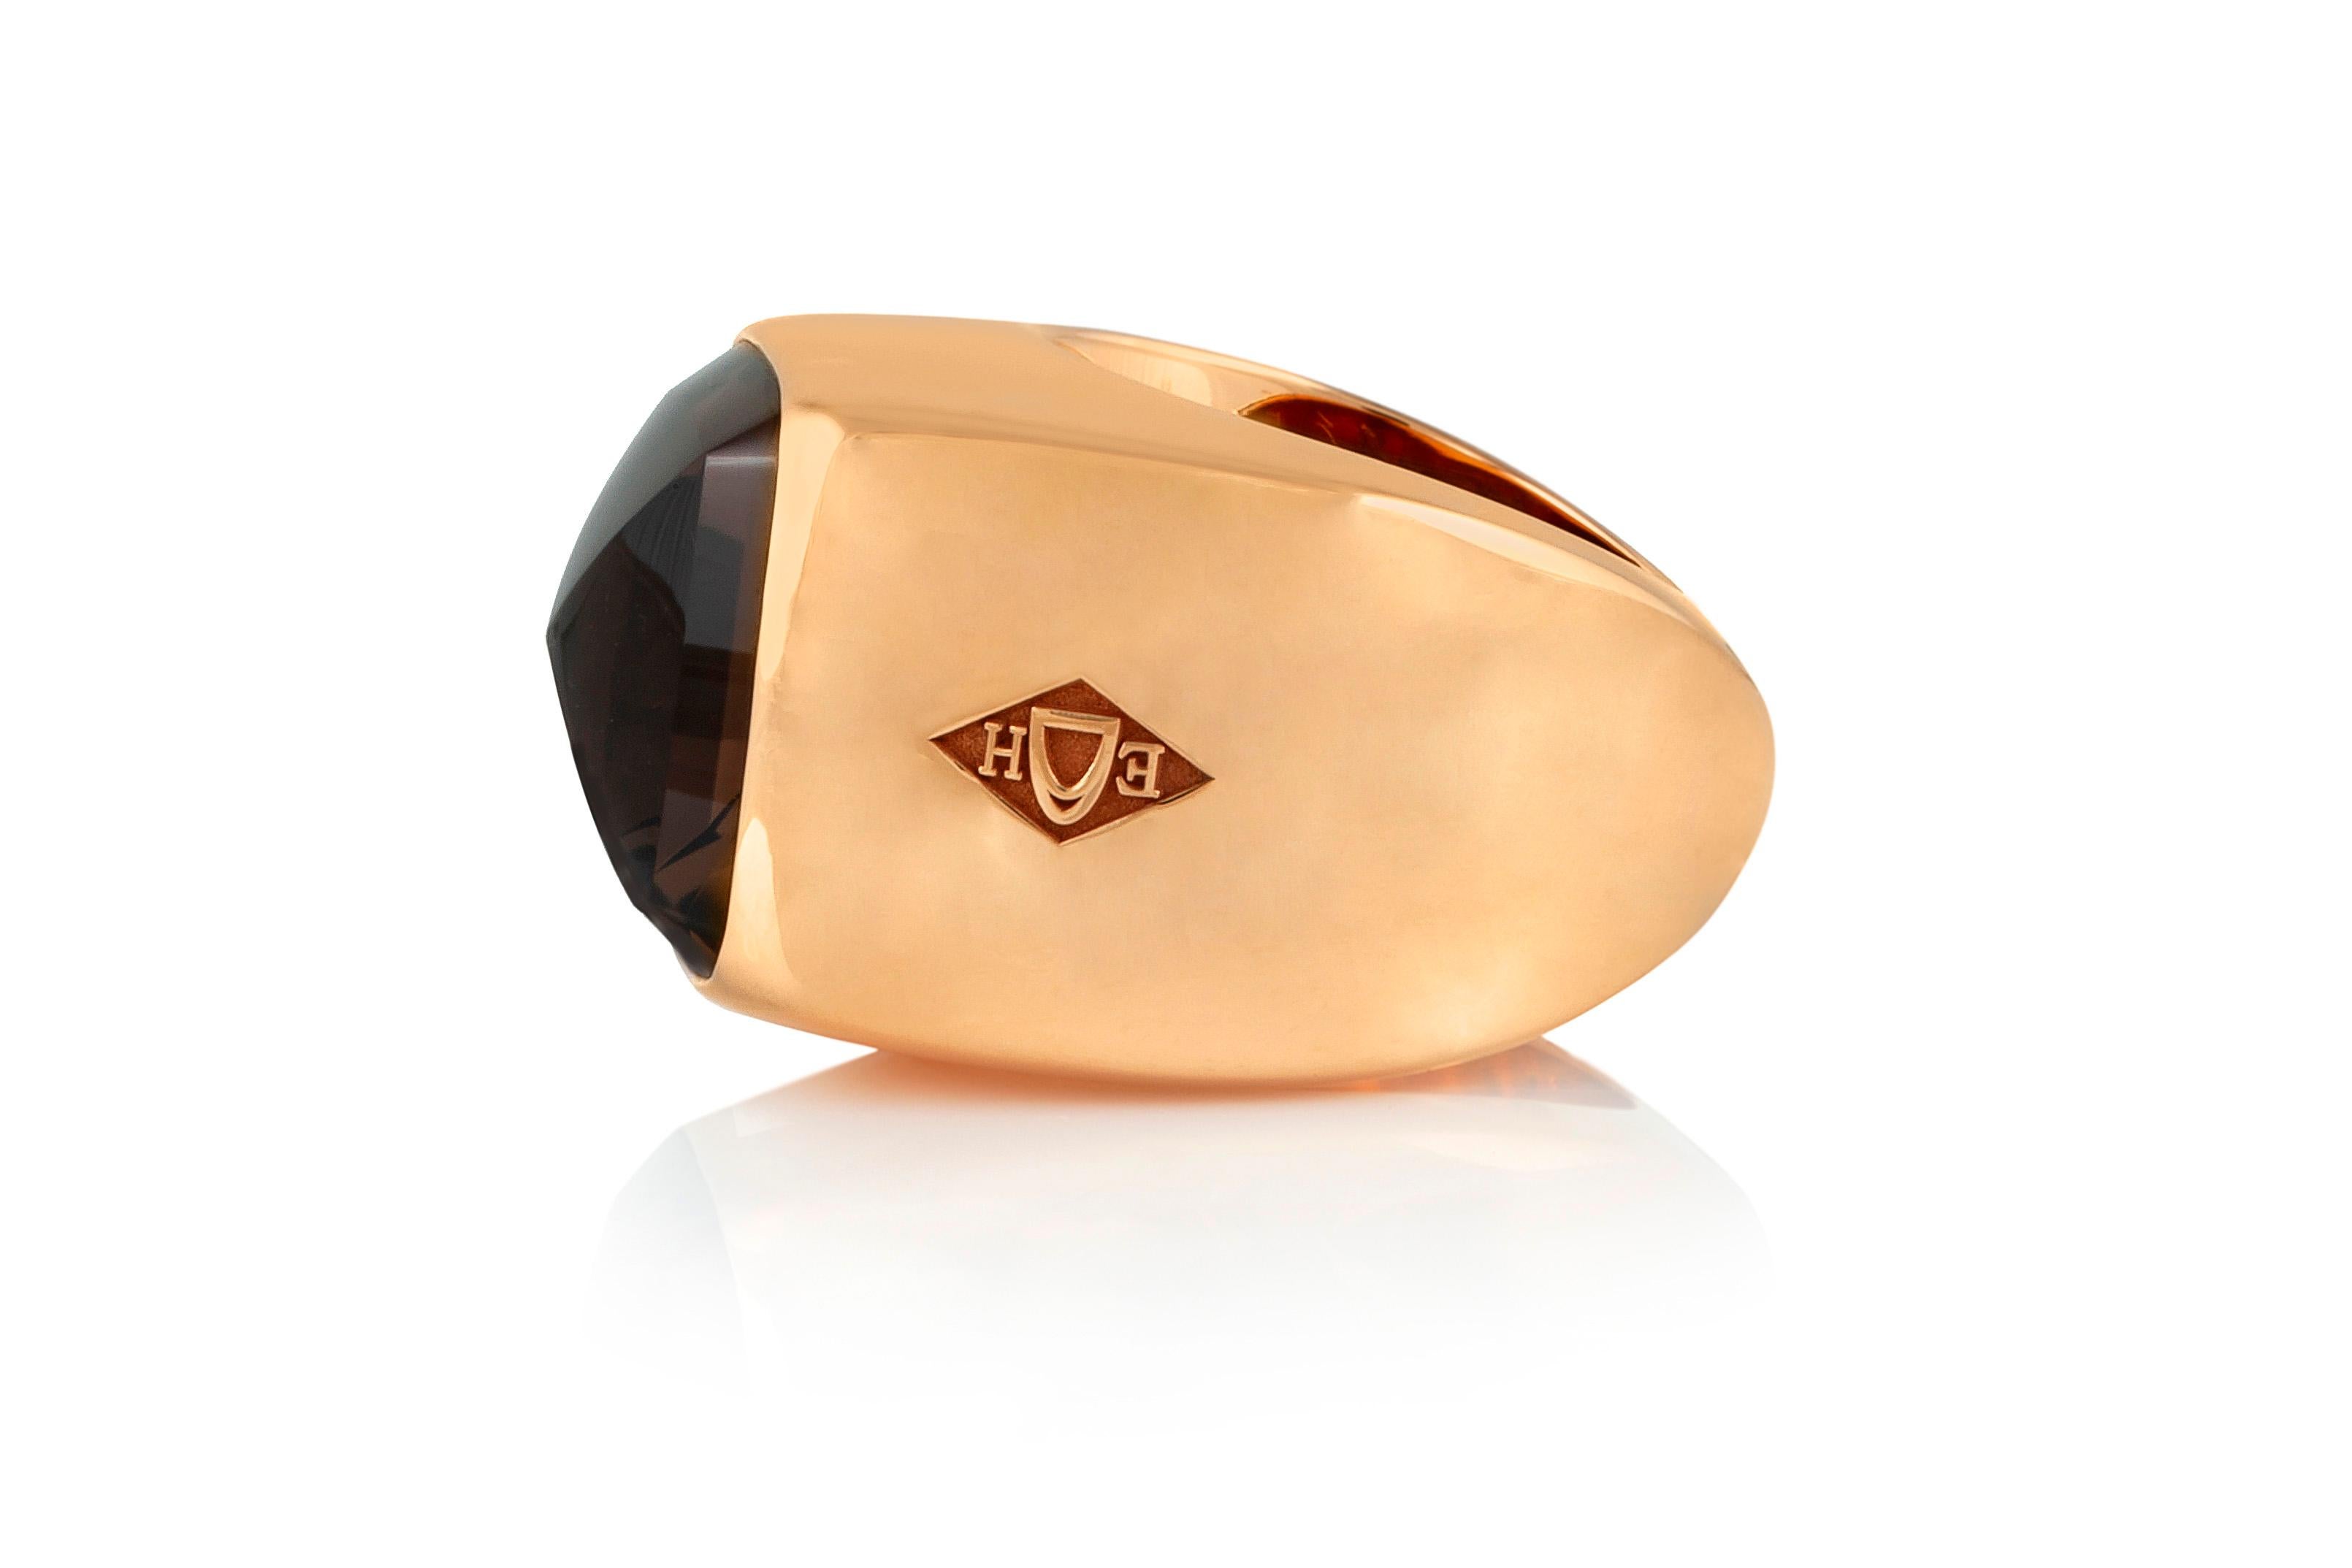 Square Cut Hermes Emile Gold Ring with Smoky Quartz